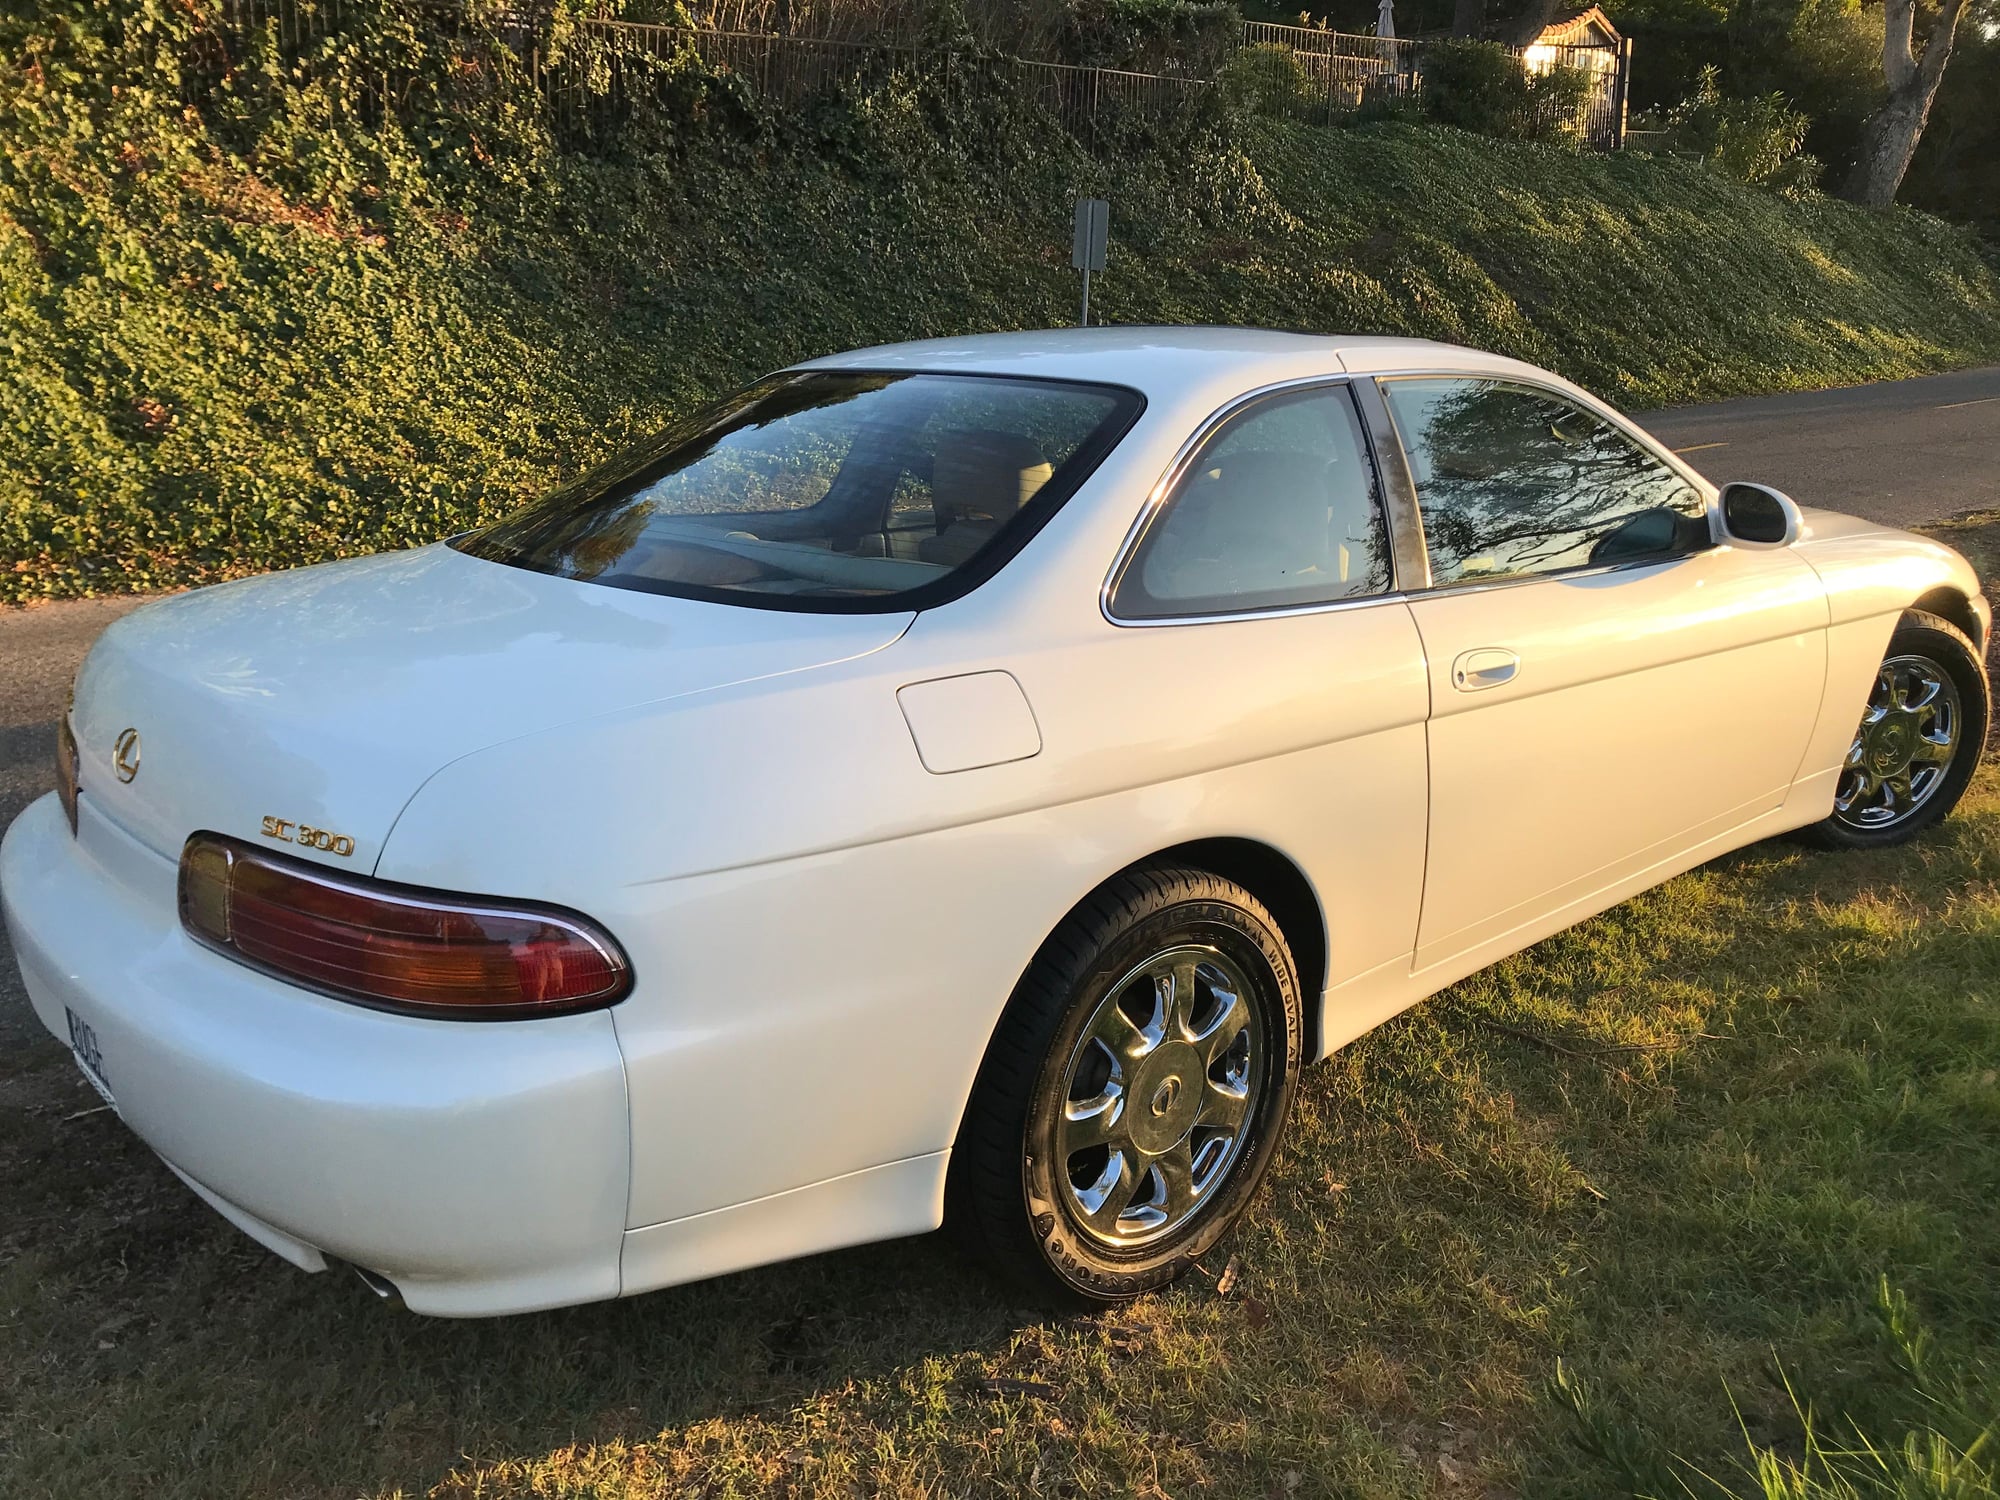 1997 Lexus SC300 - 1997 Lexus SC300 - 45,000 miles, immaculate - Used - VIN JT8CD32Z4V0038822 - 45,000 Miles - 6 cyl - 2WD - Automatic - Coupe - White - Santa Barbara, CA 93109, United States